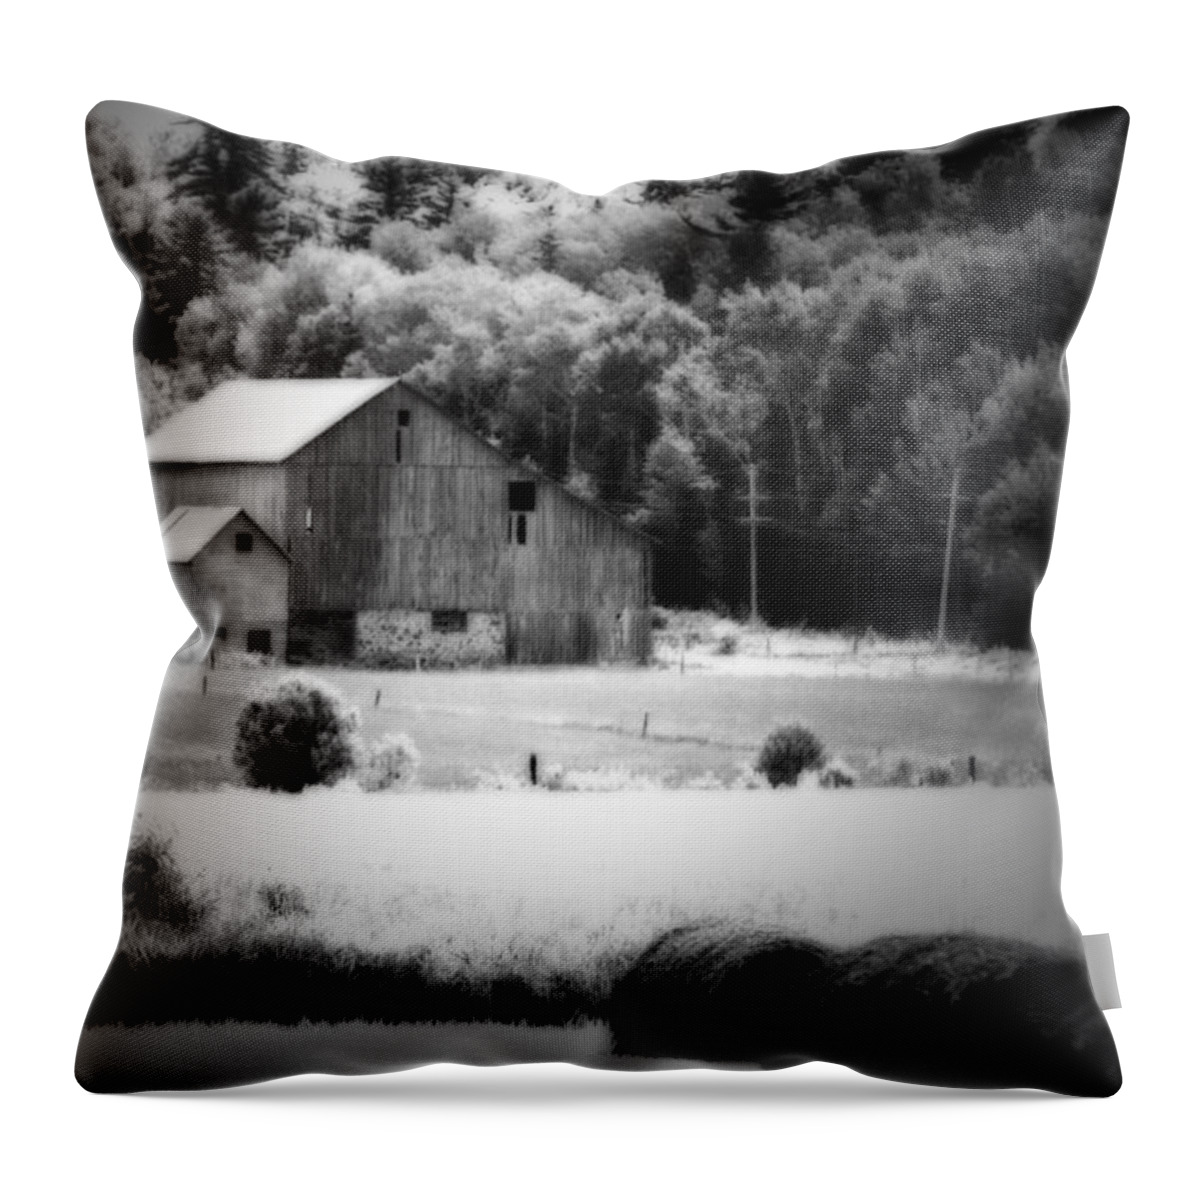 Barn Throw Pillow featuring the photograph Country Living by Cathy Beharriell